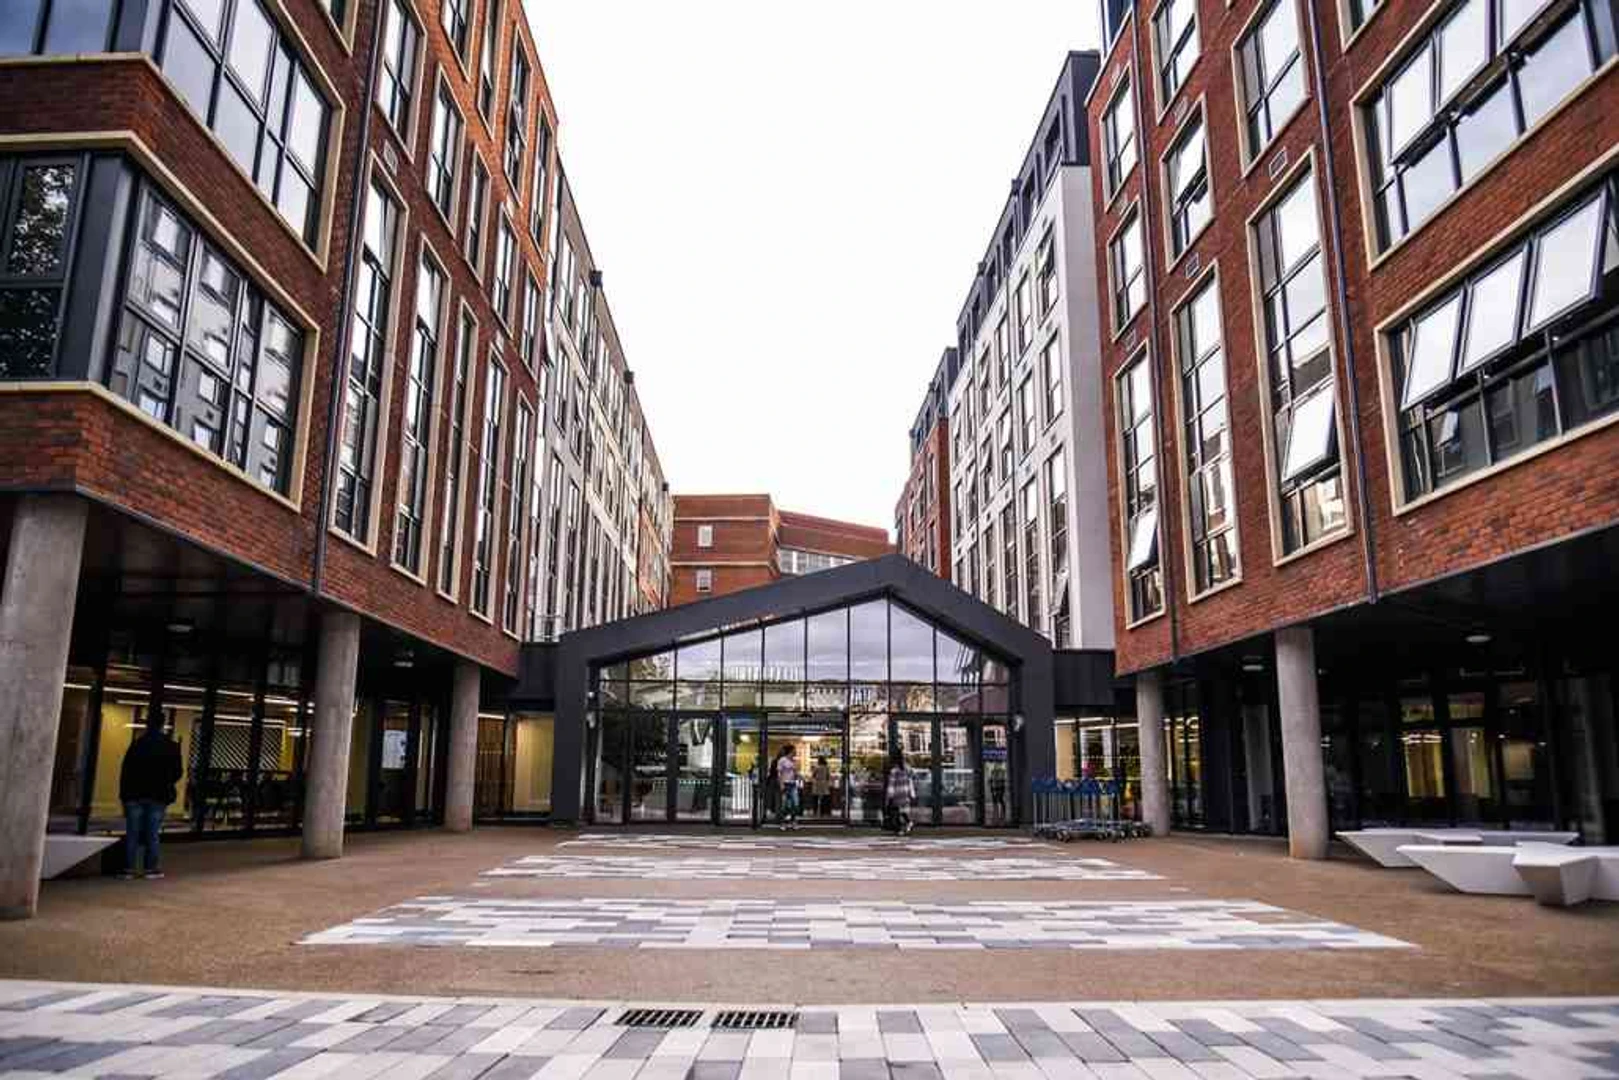 Accommodation in the centre of Cardiff